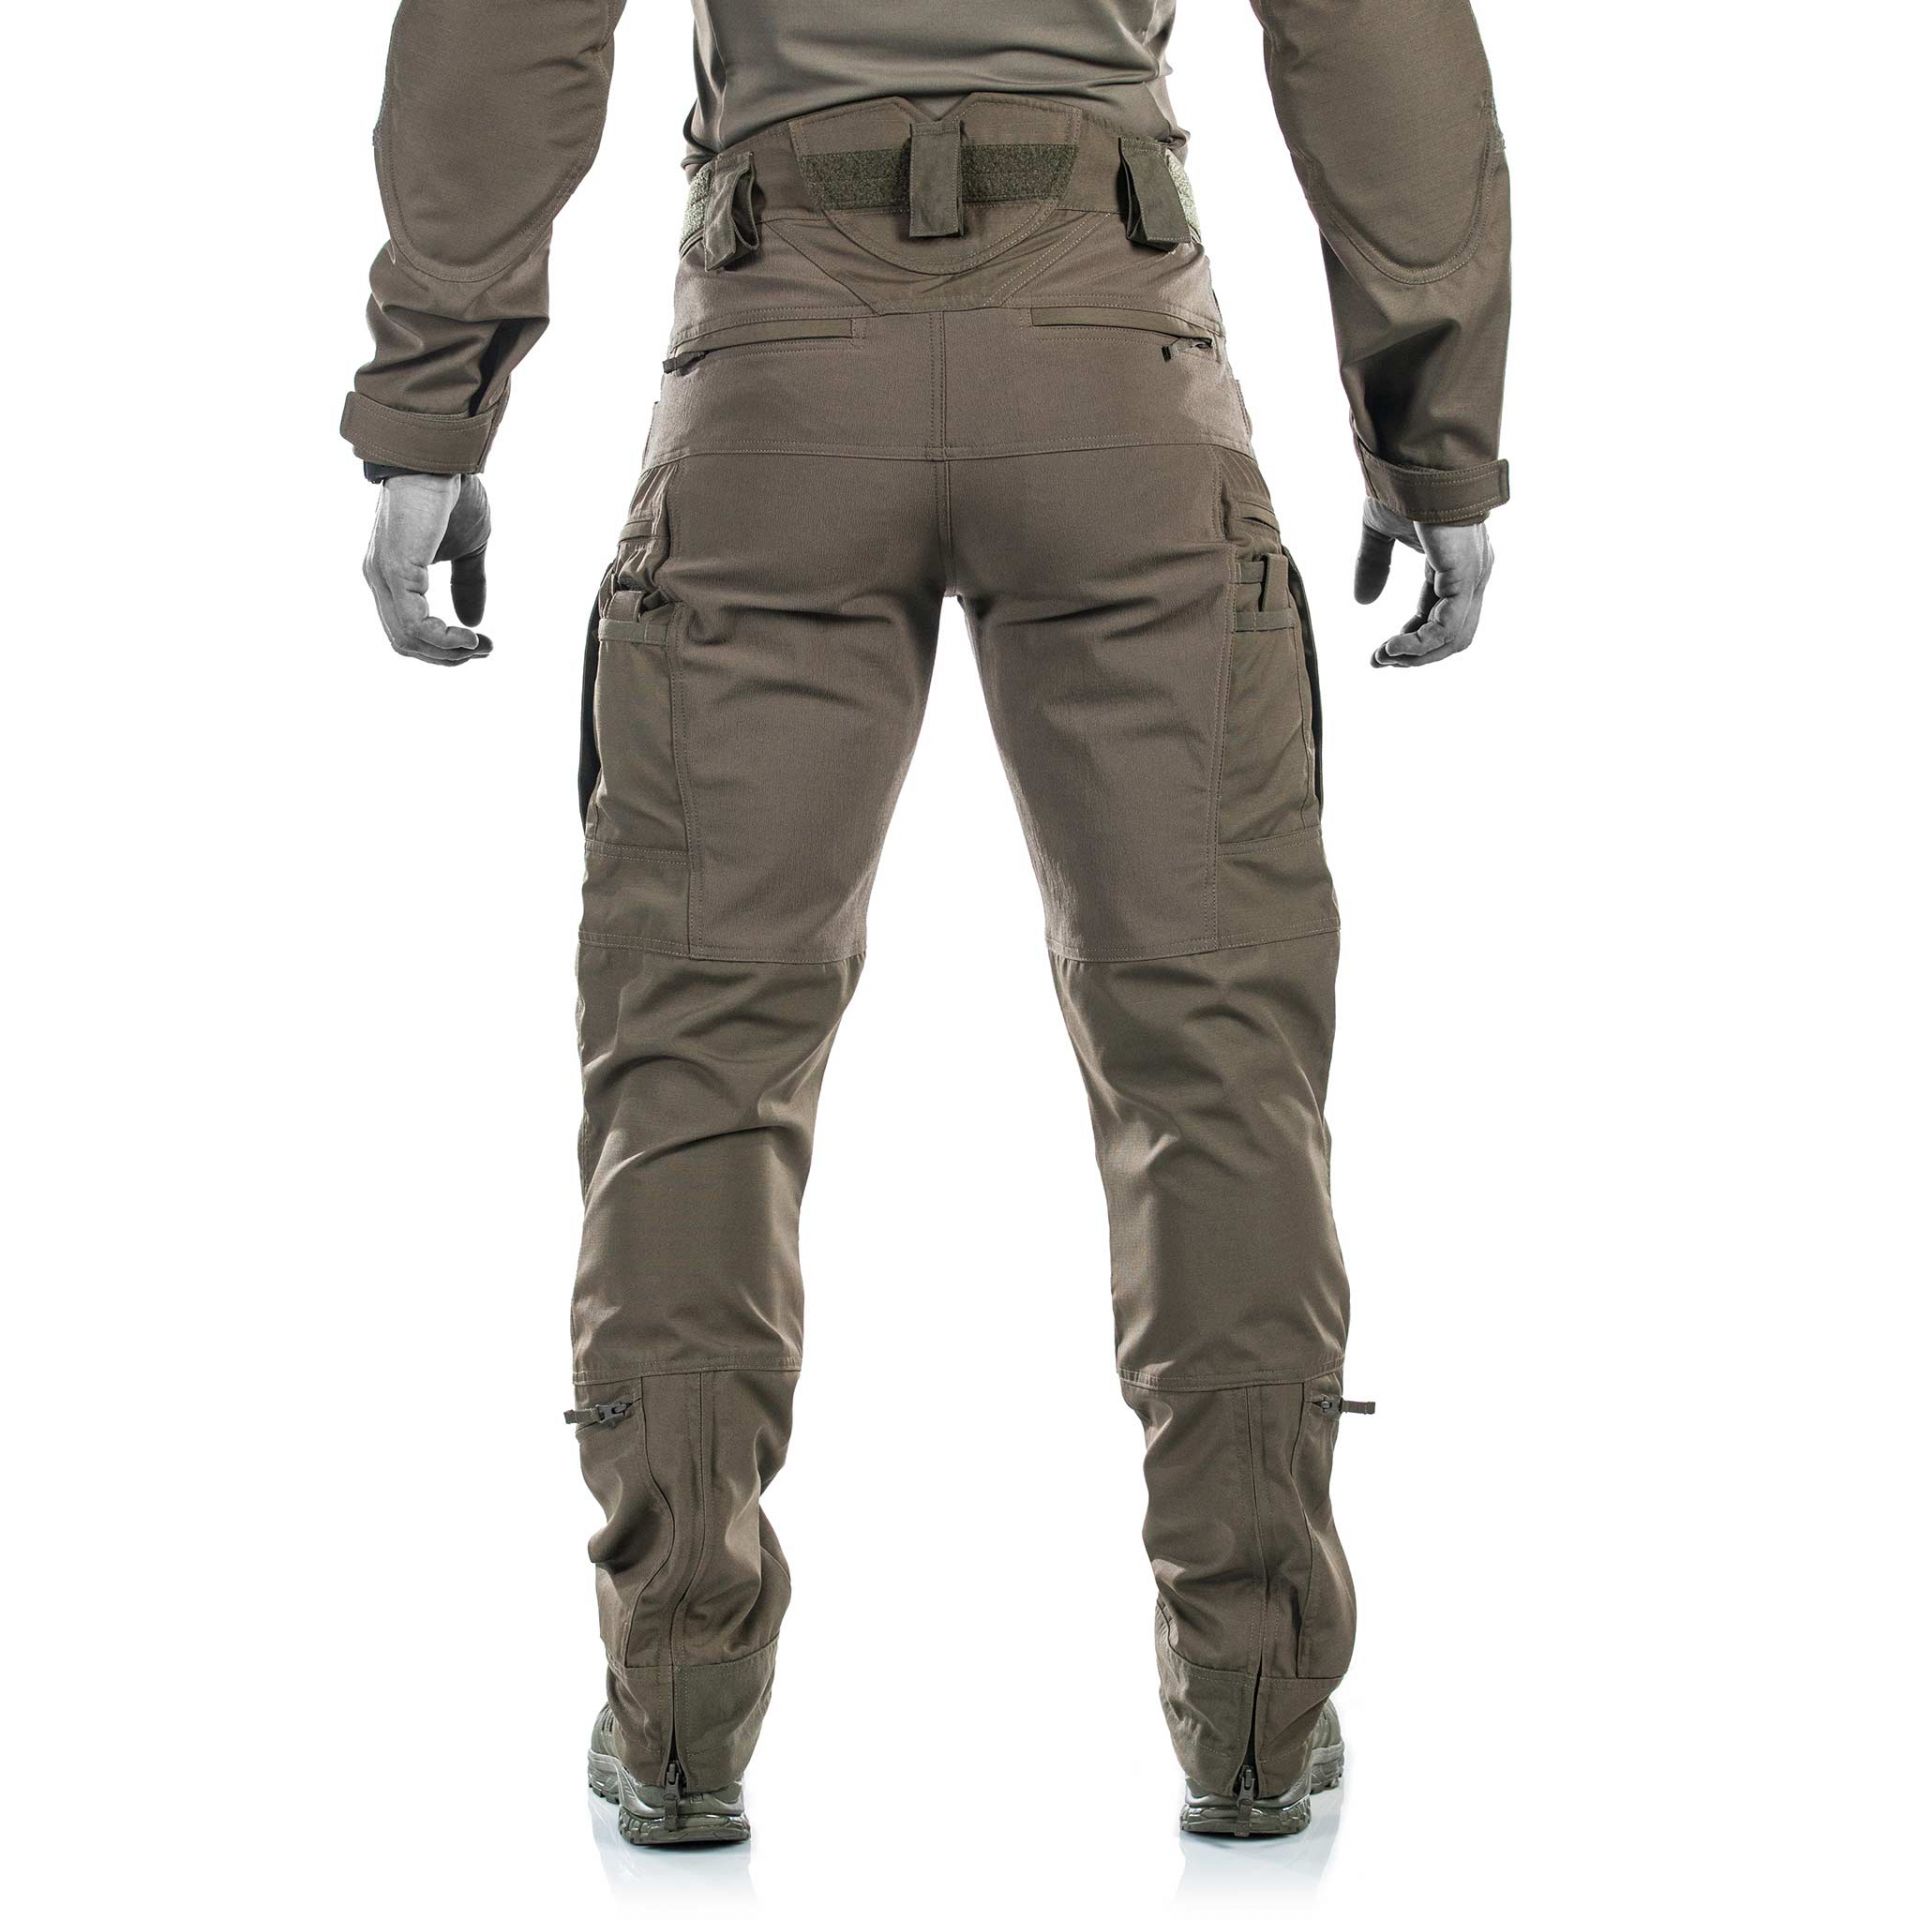 Under Armour rolls out new tactical pants 